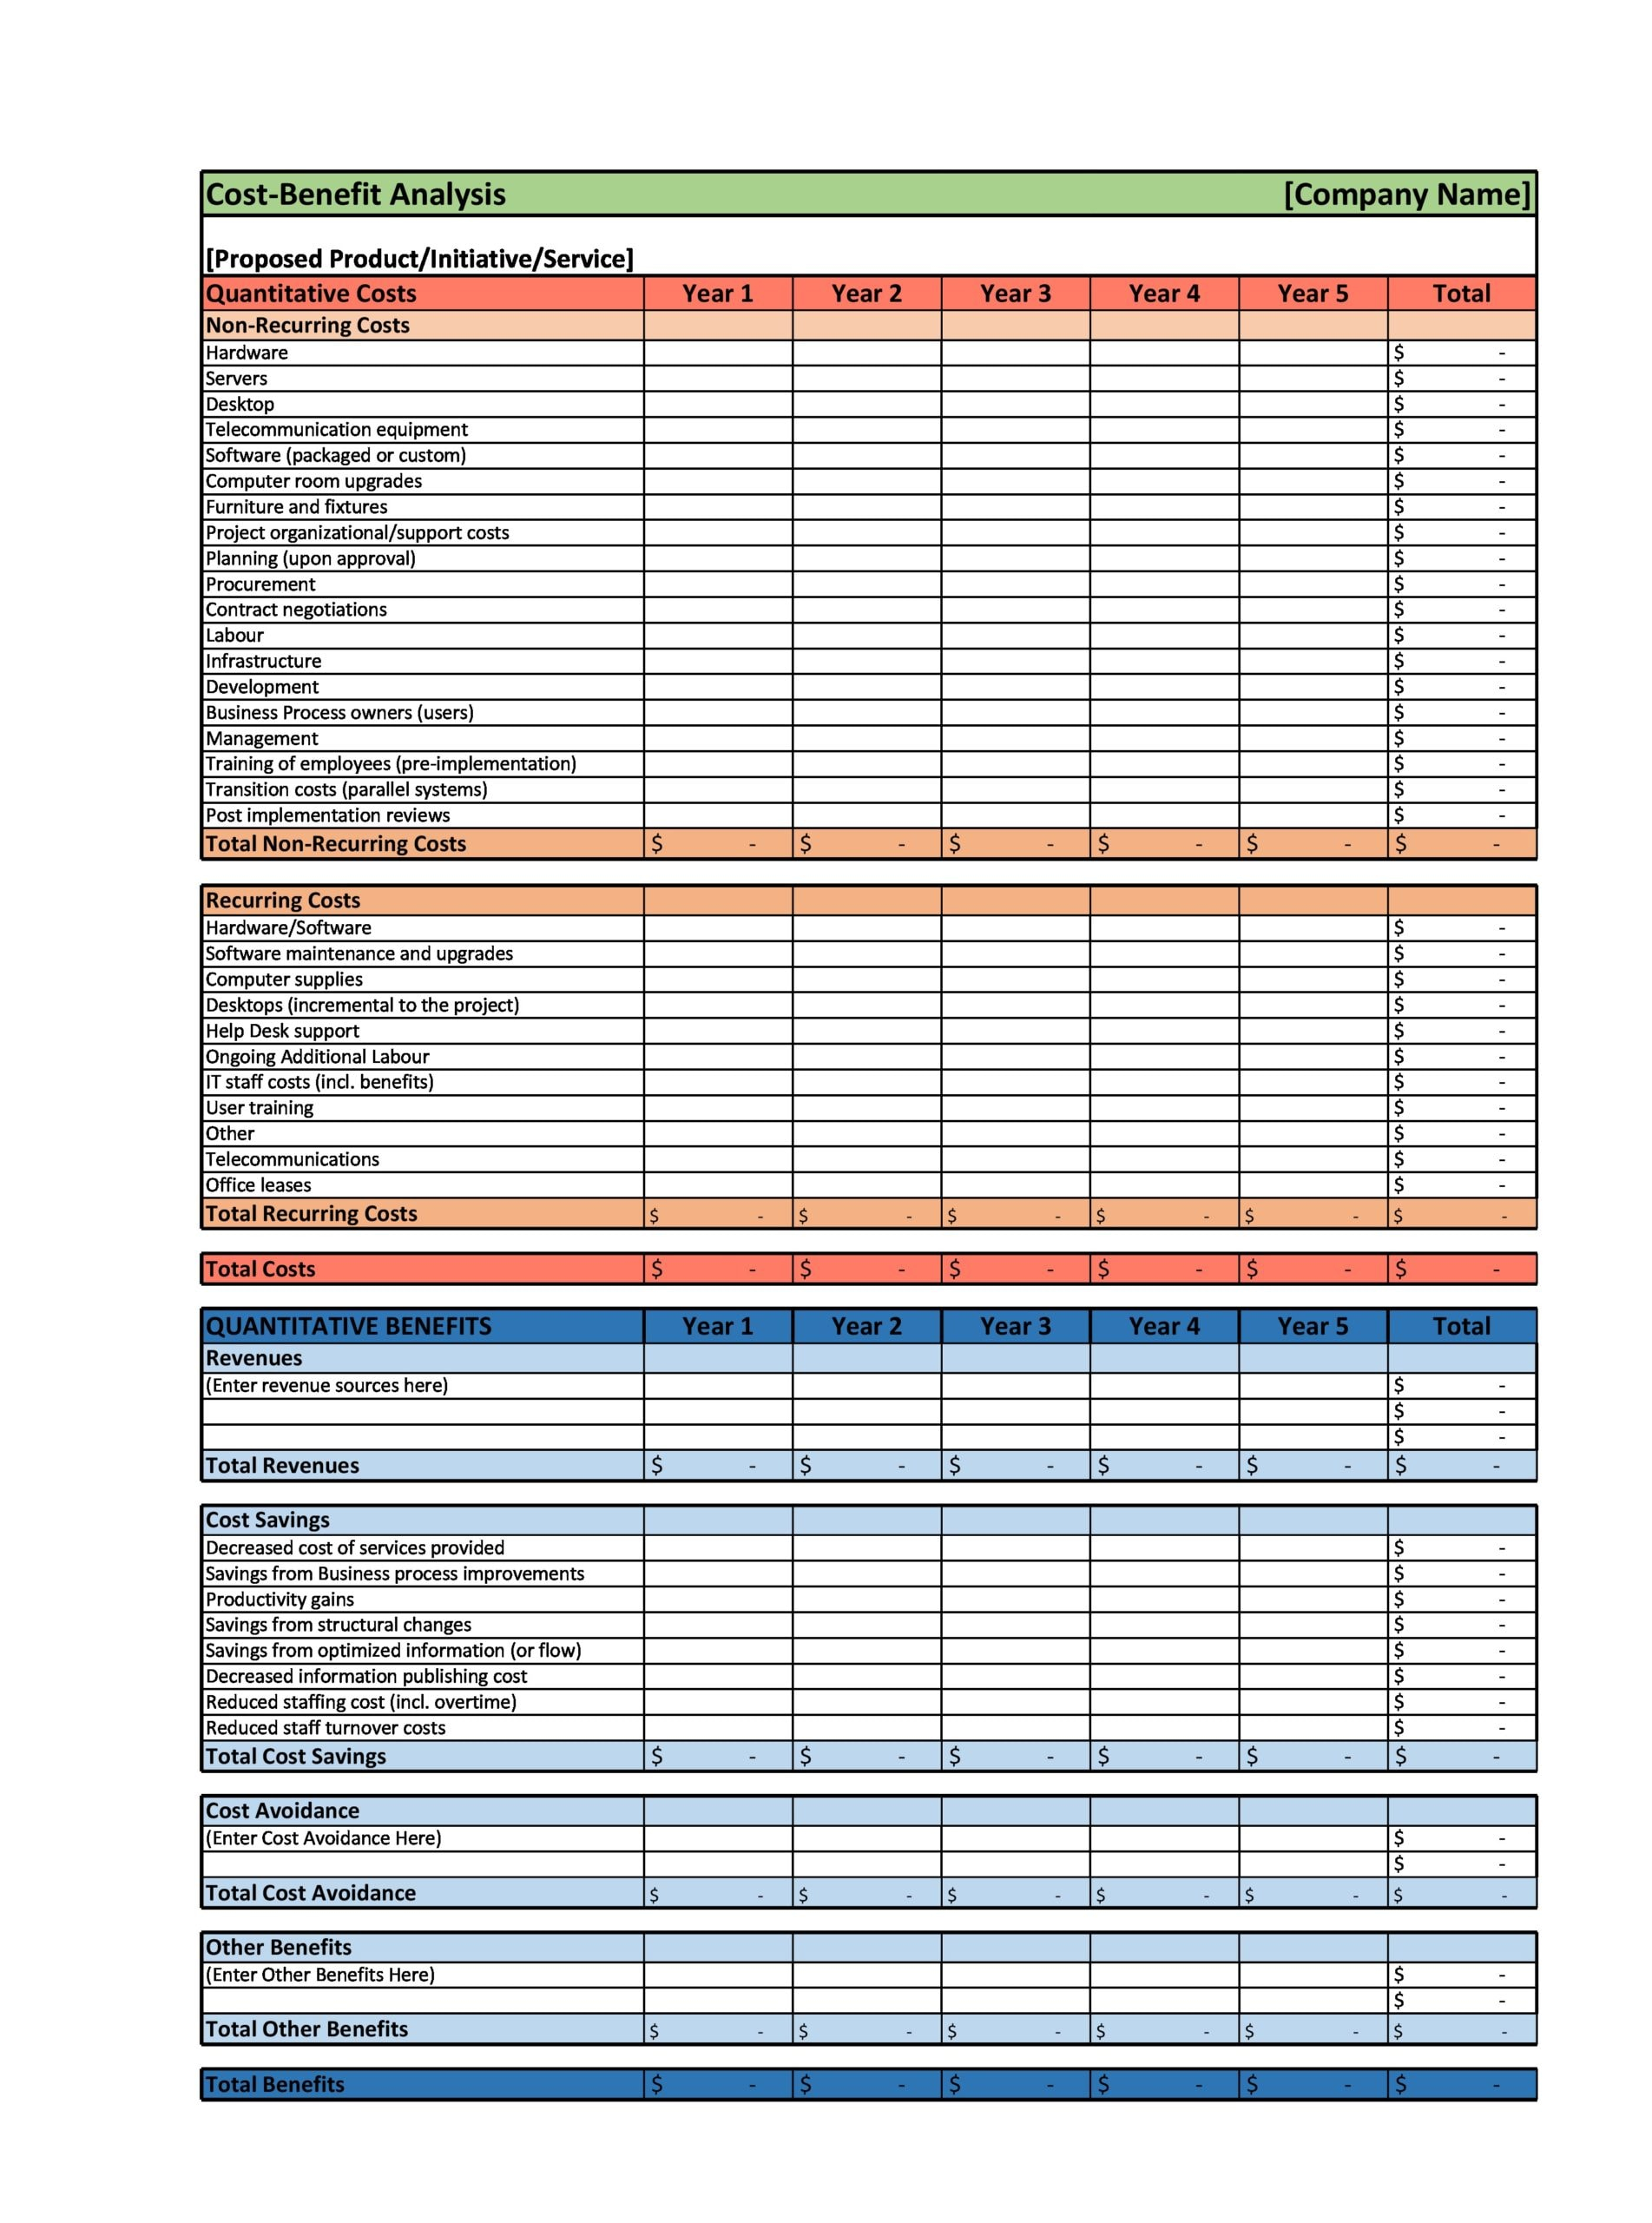 11 Simple Cost Benefit Analysis Templates (Word/Excel) Within Cost Analysis Spreadsheet Template Within Cost Analysis Spreadsheet Template